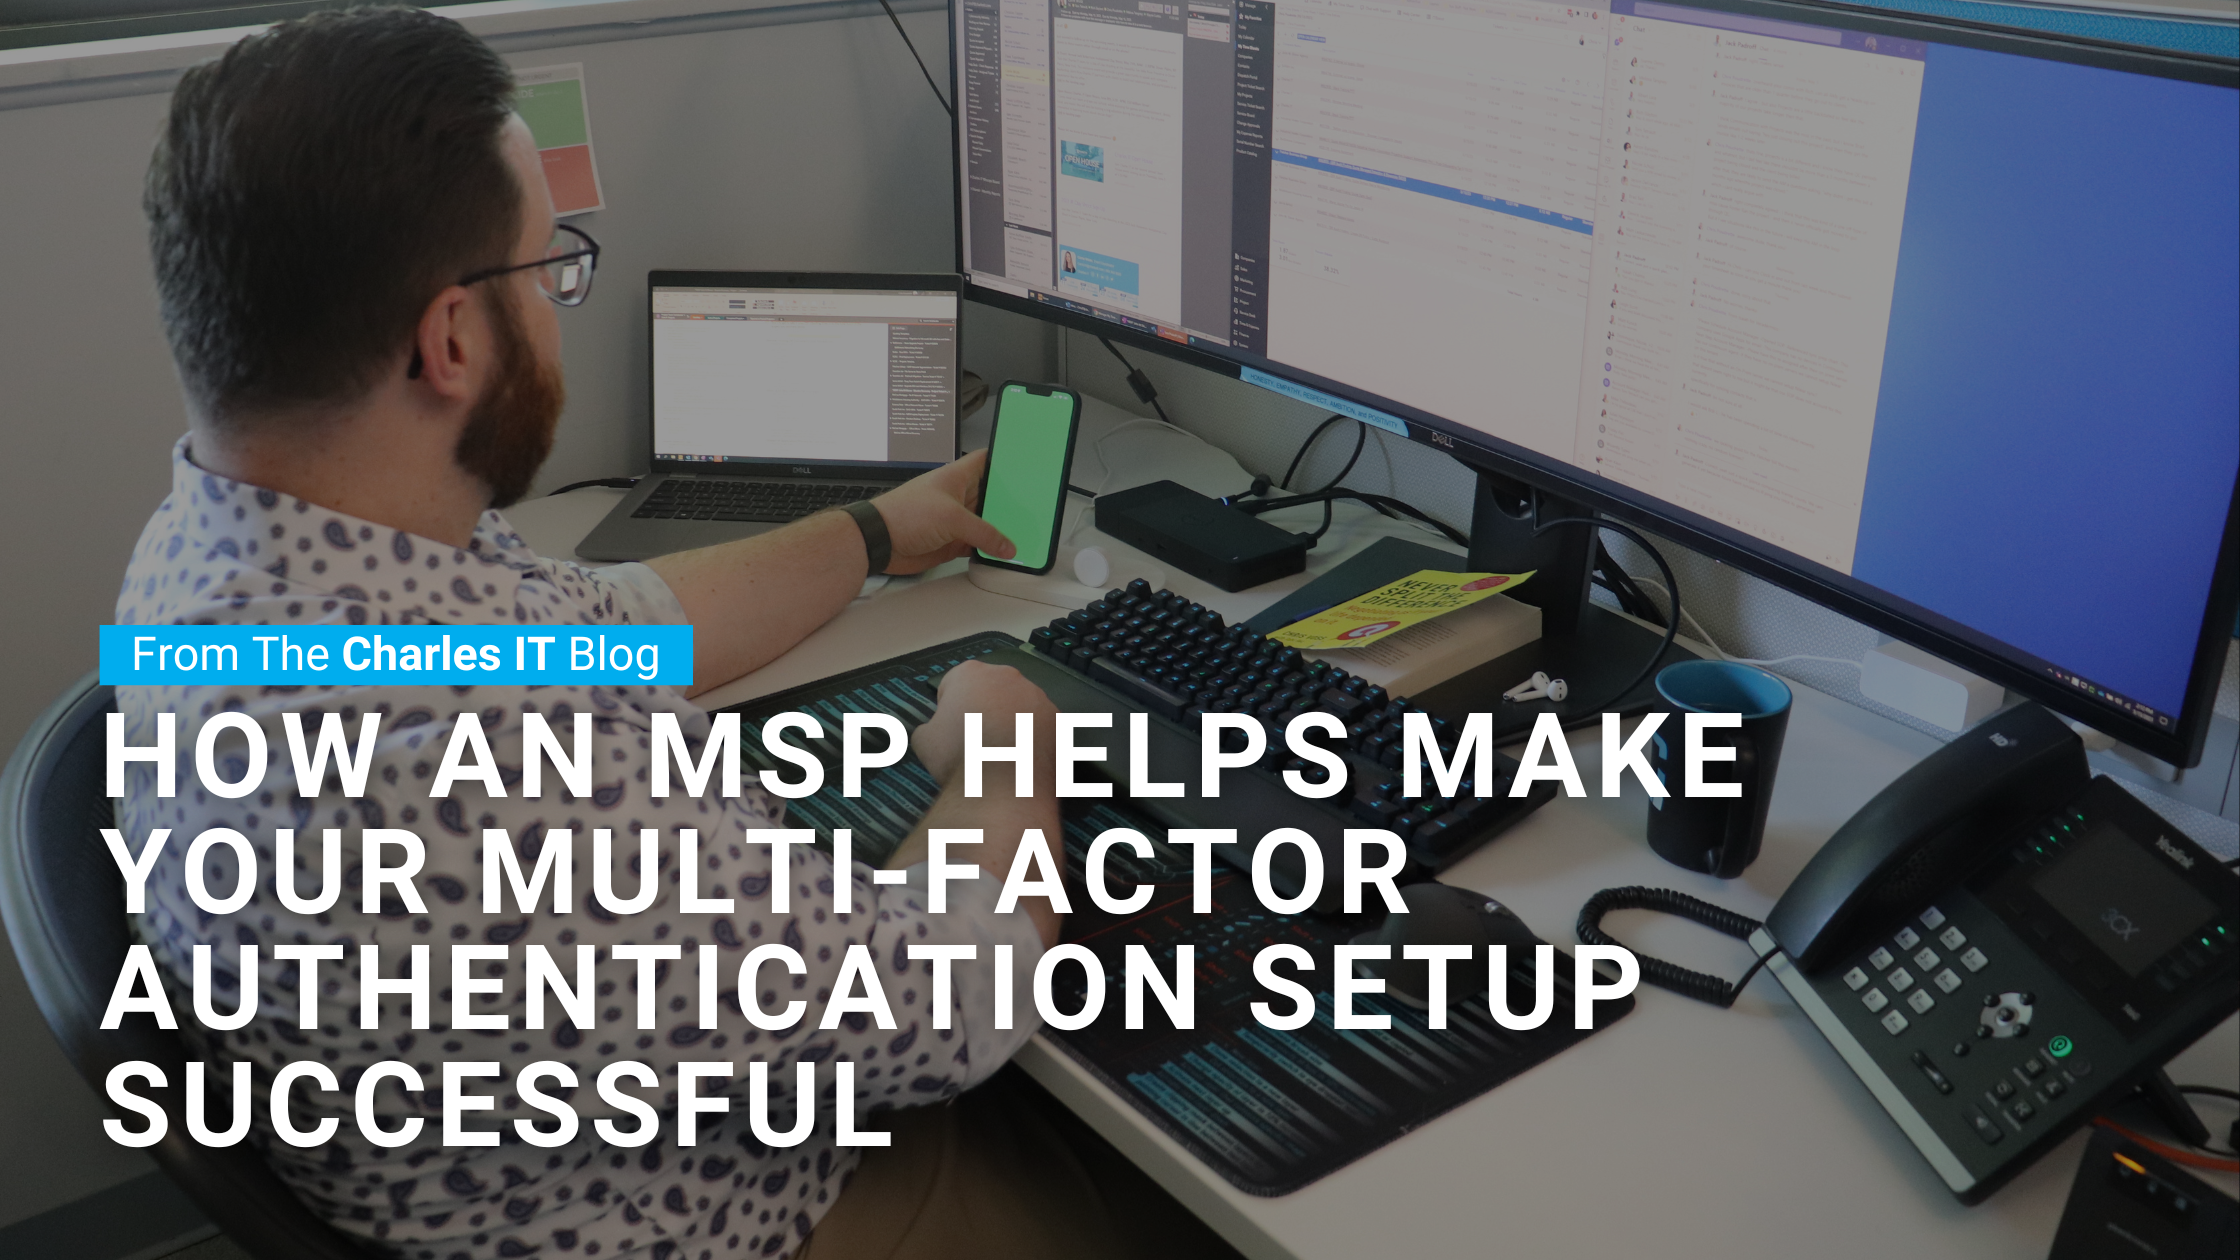 How an MSP Helps Make Your Multi-Factor Authentication Setup Successful